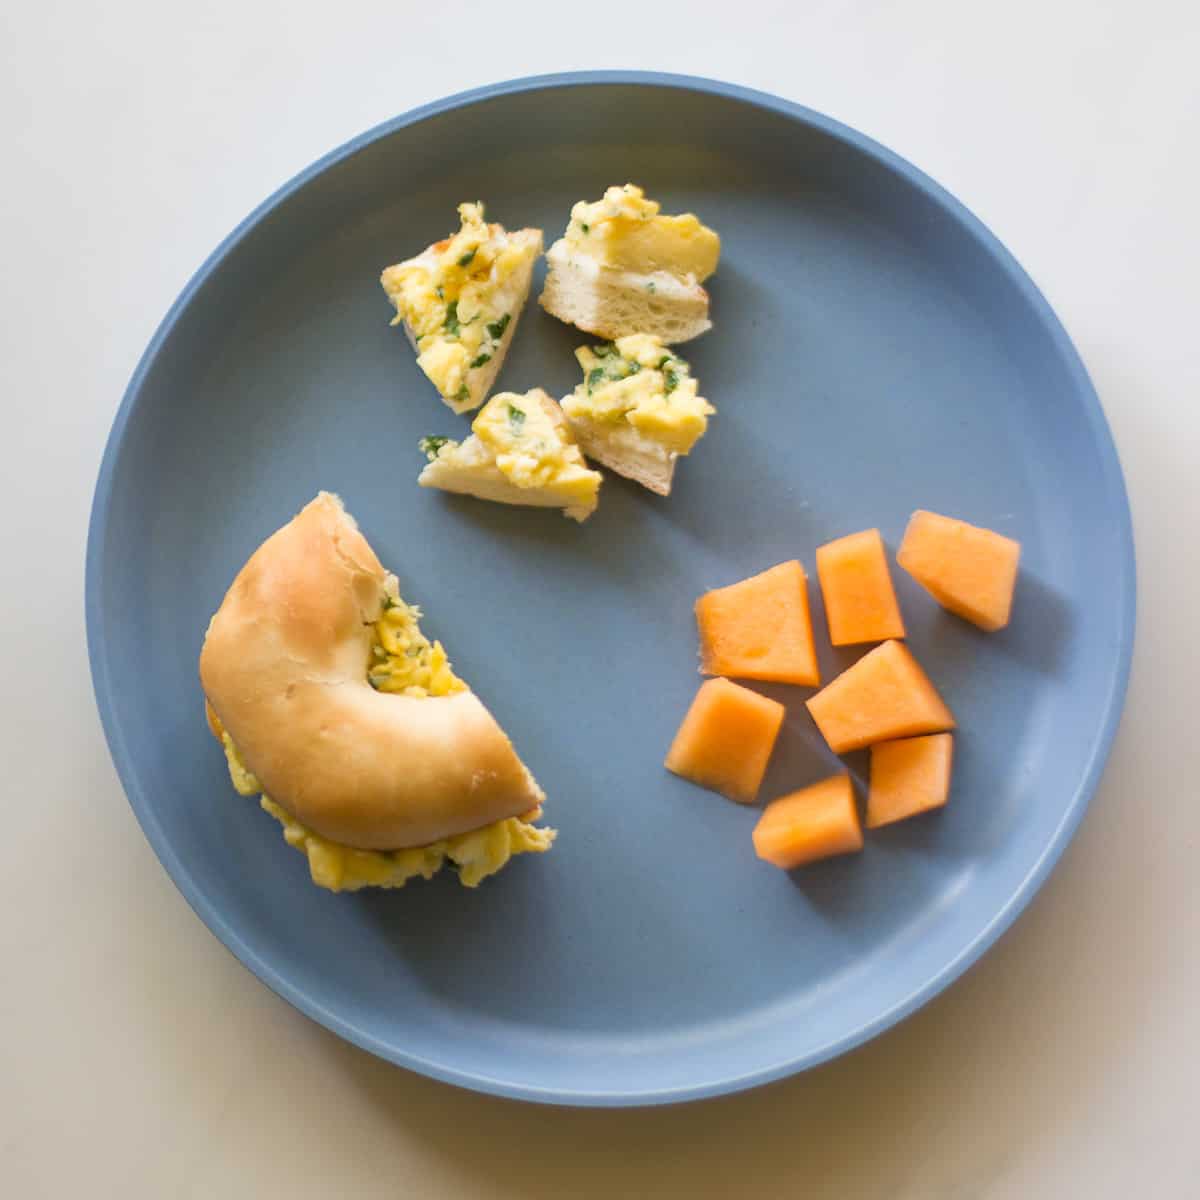 Halved egg salad bagel sandwich with bite-sized pieces and butternut squash.